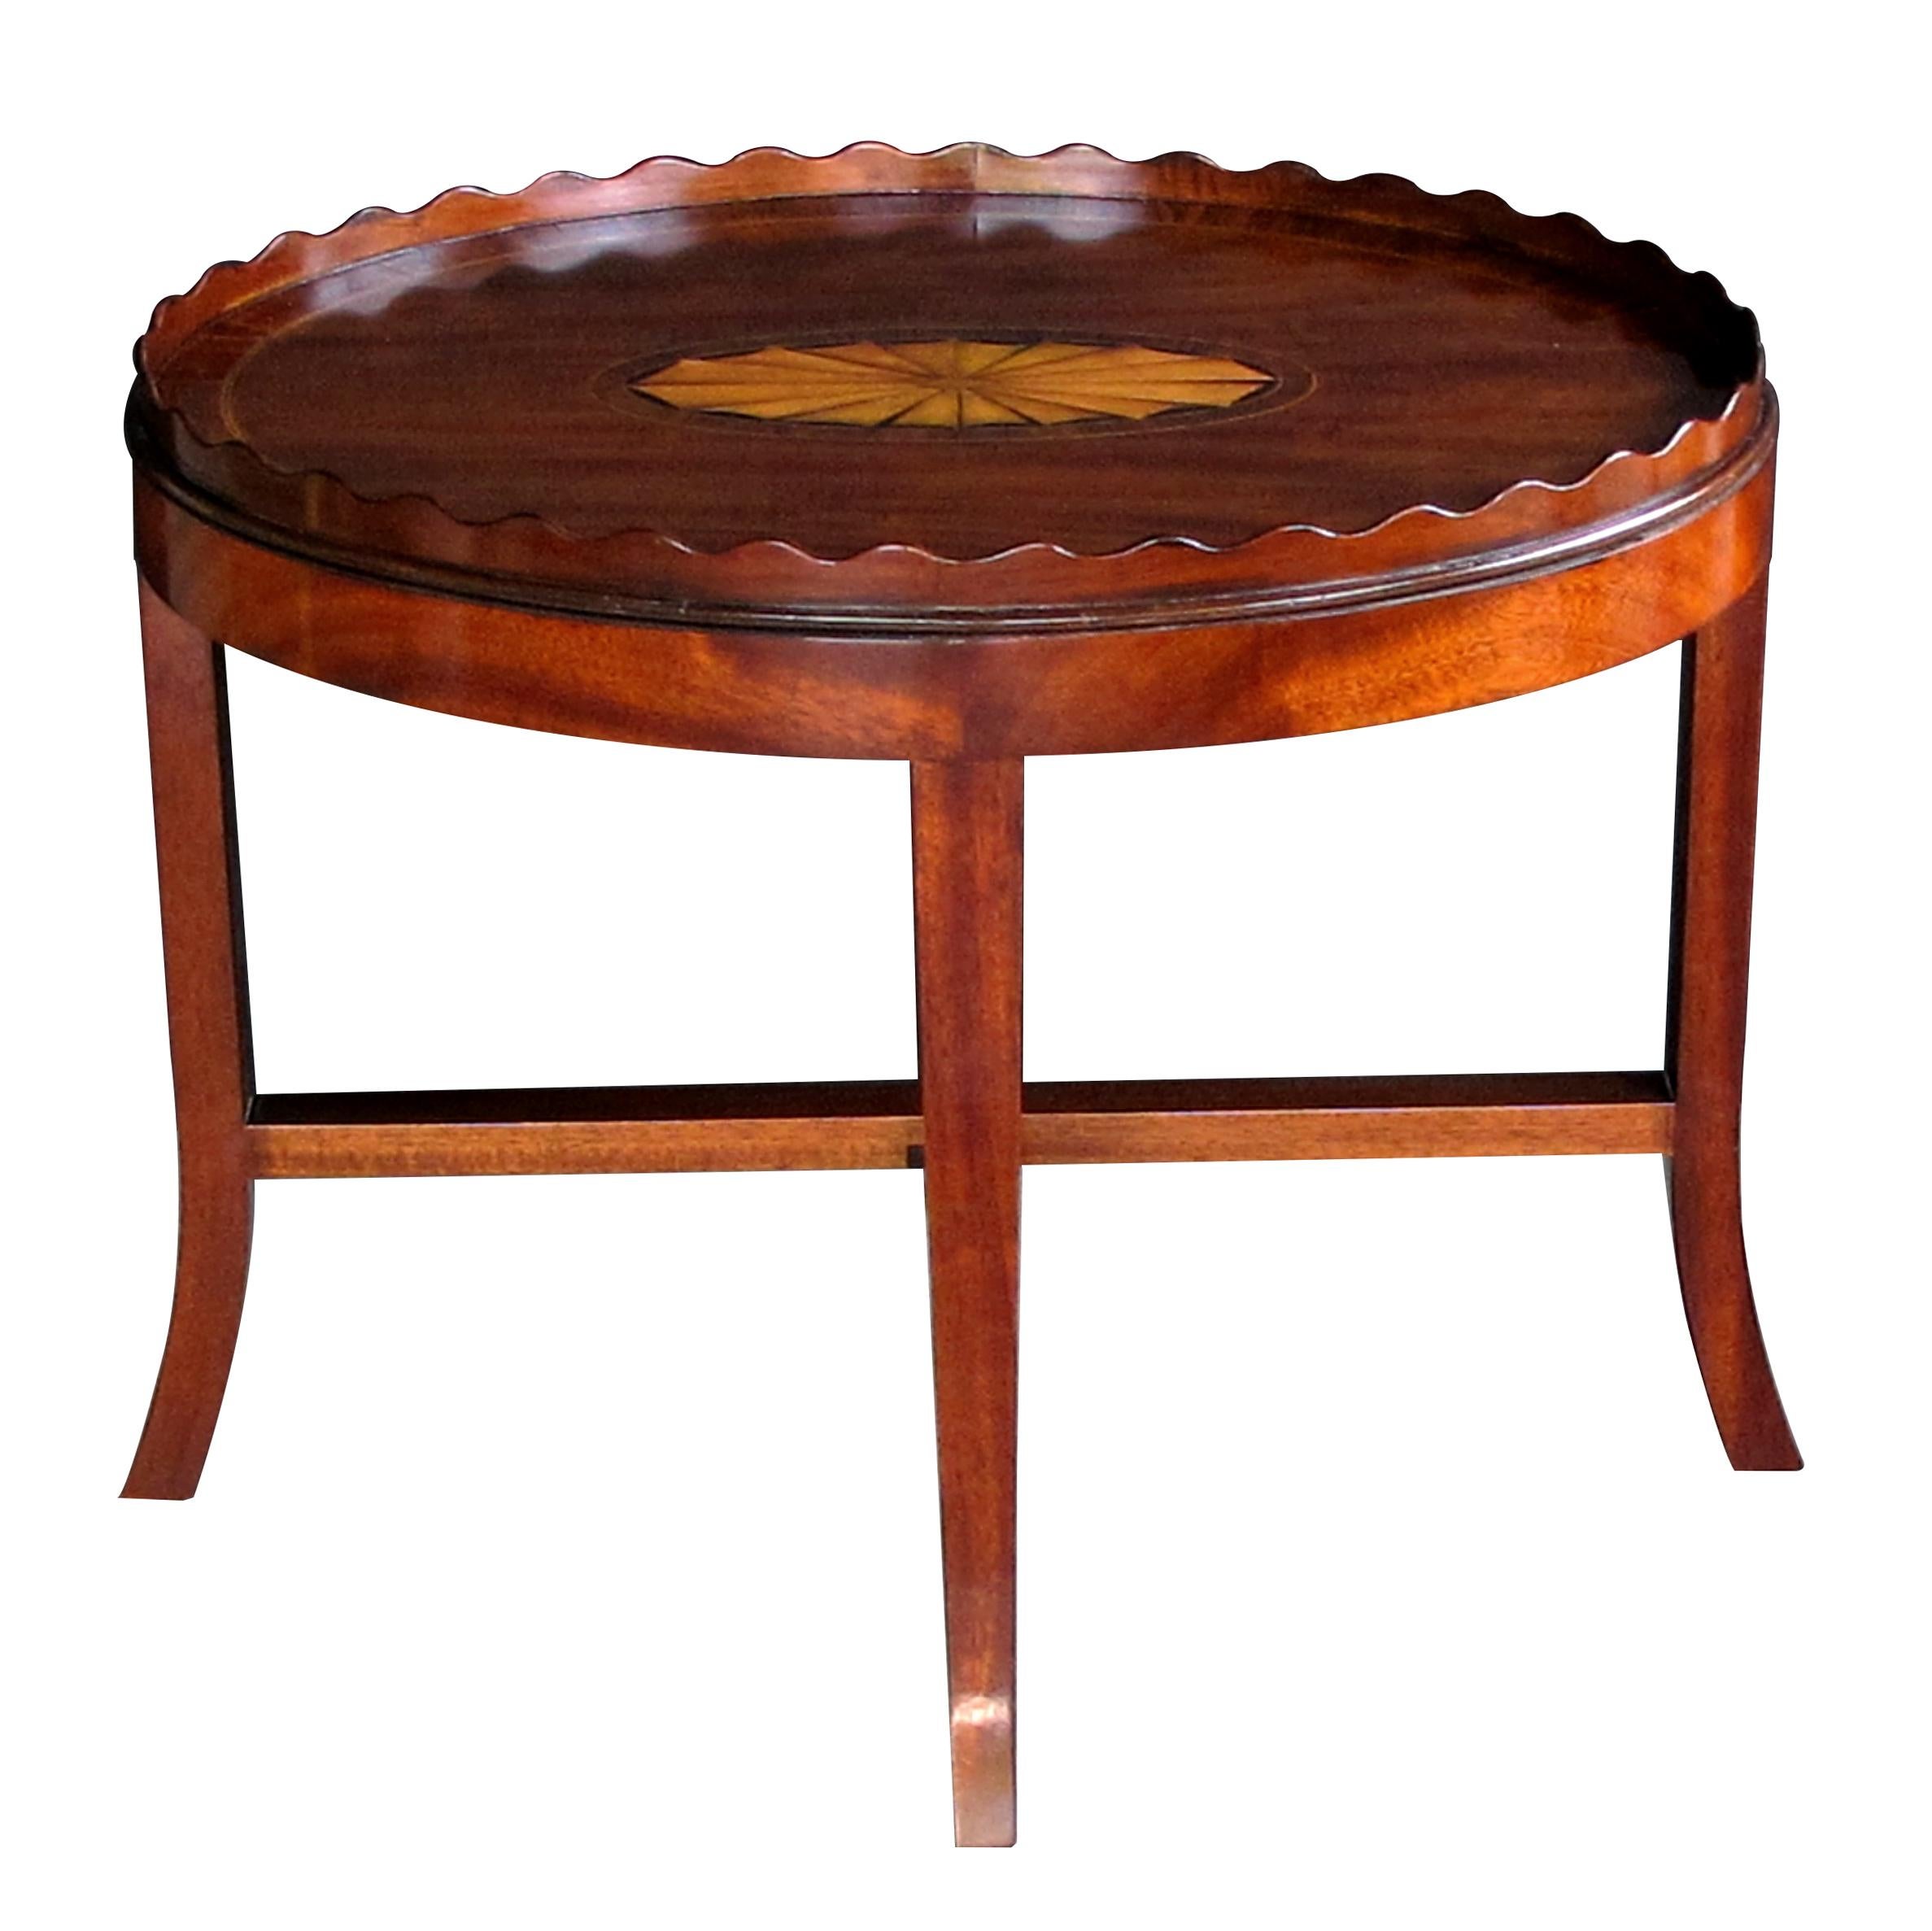 Handsome English George III Style Oval Inlaid Tray on Stand For Sale